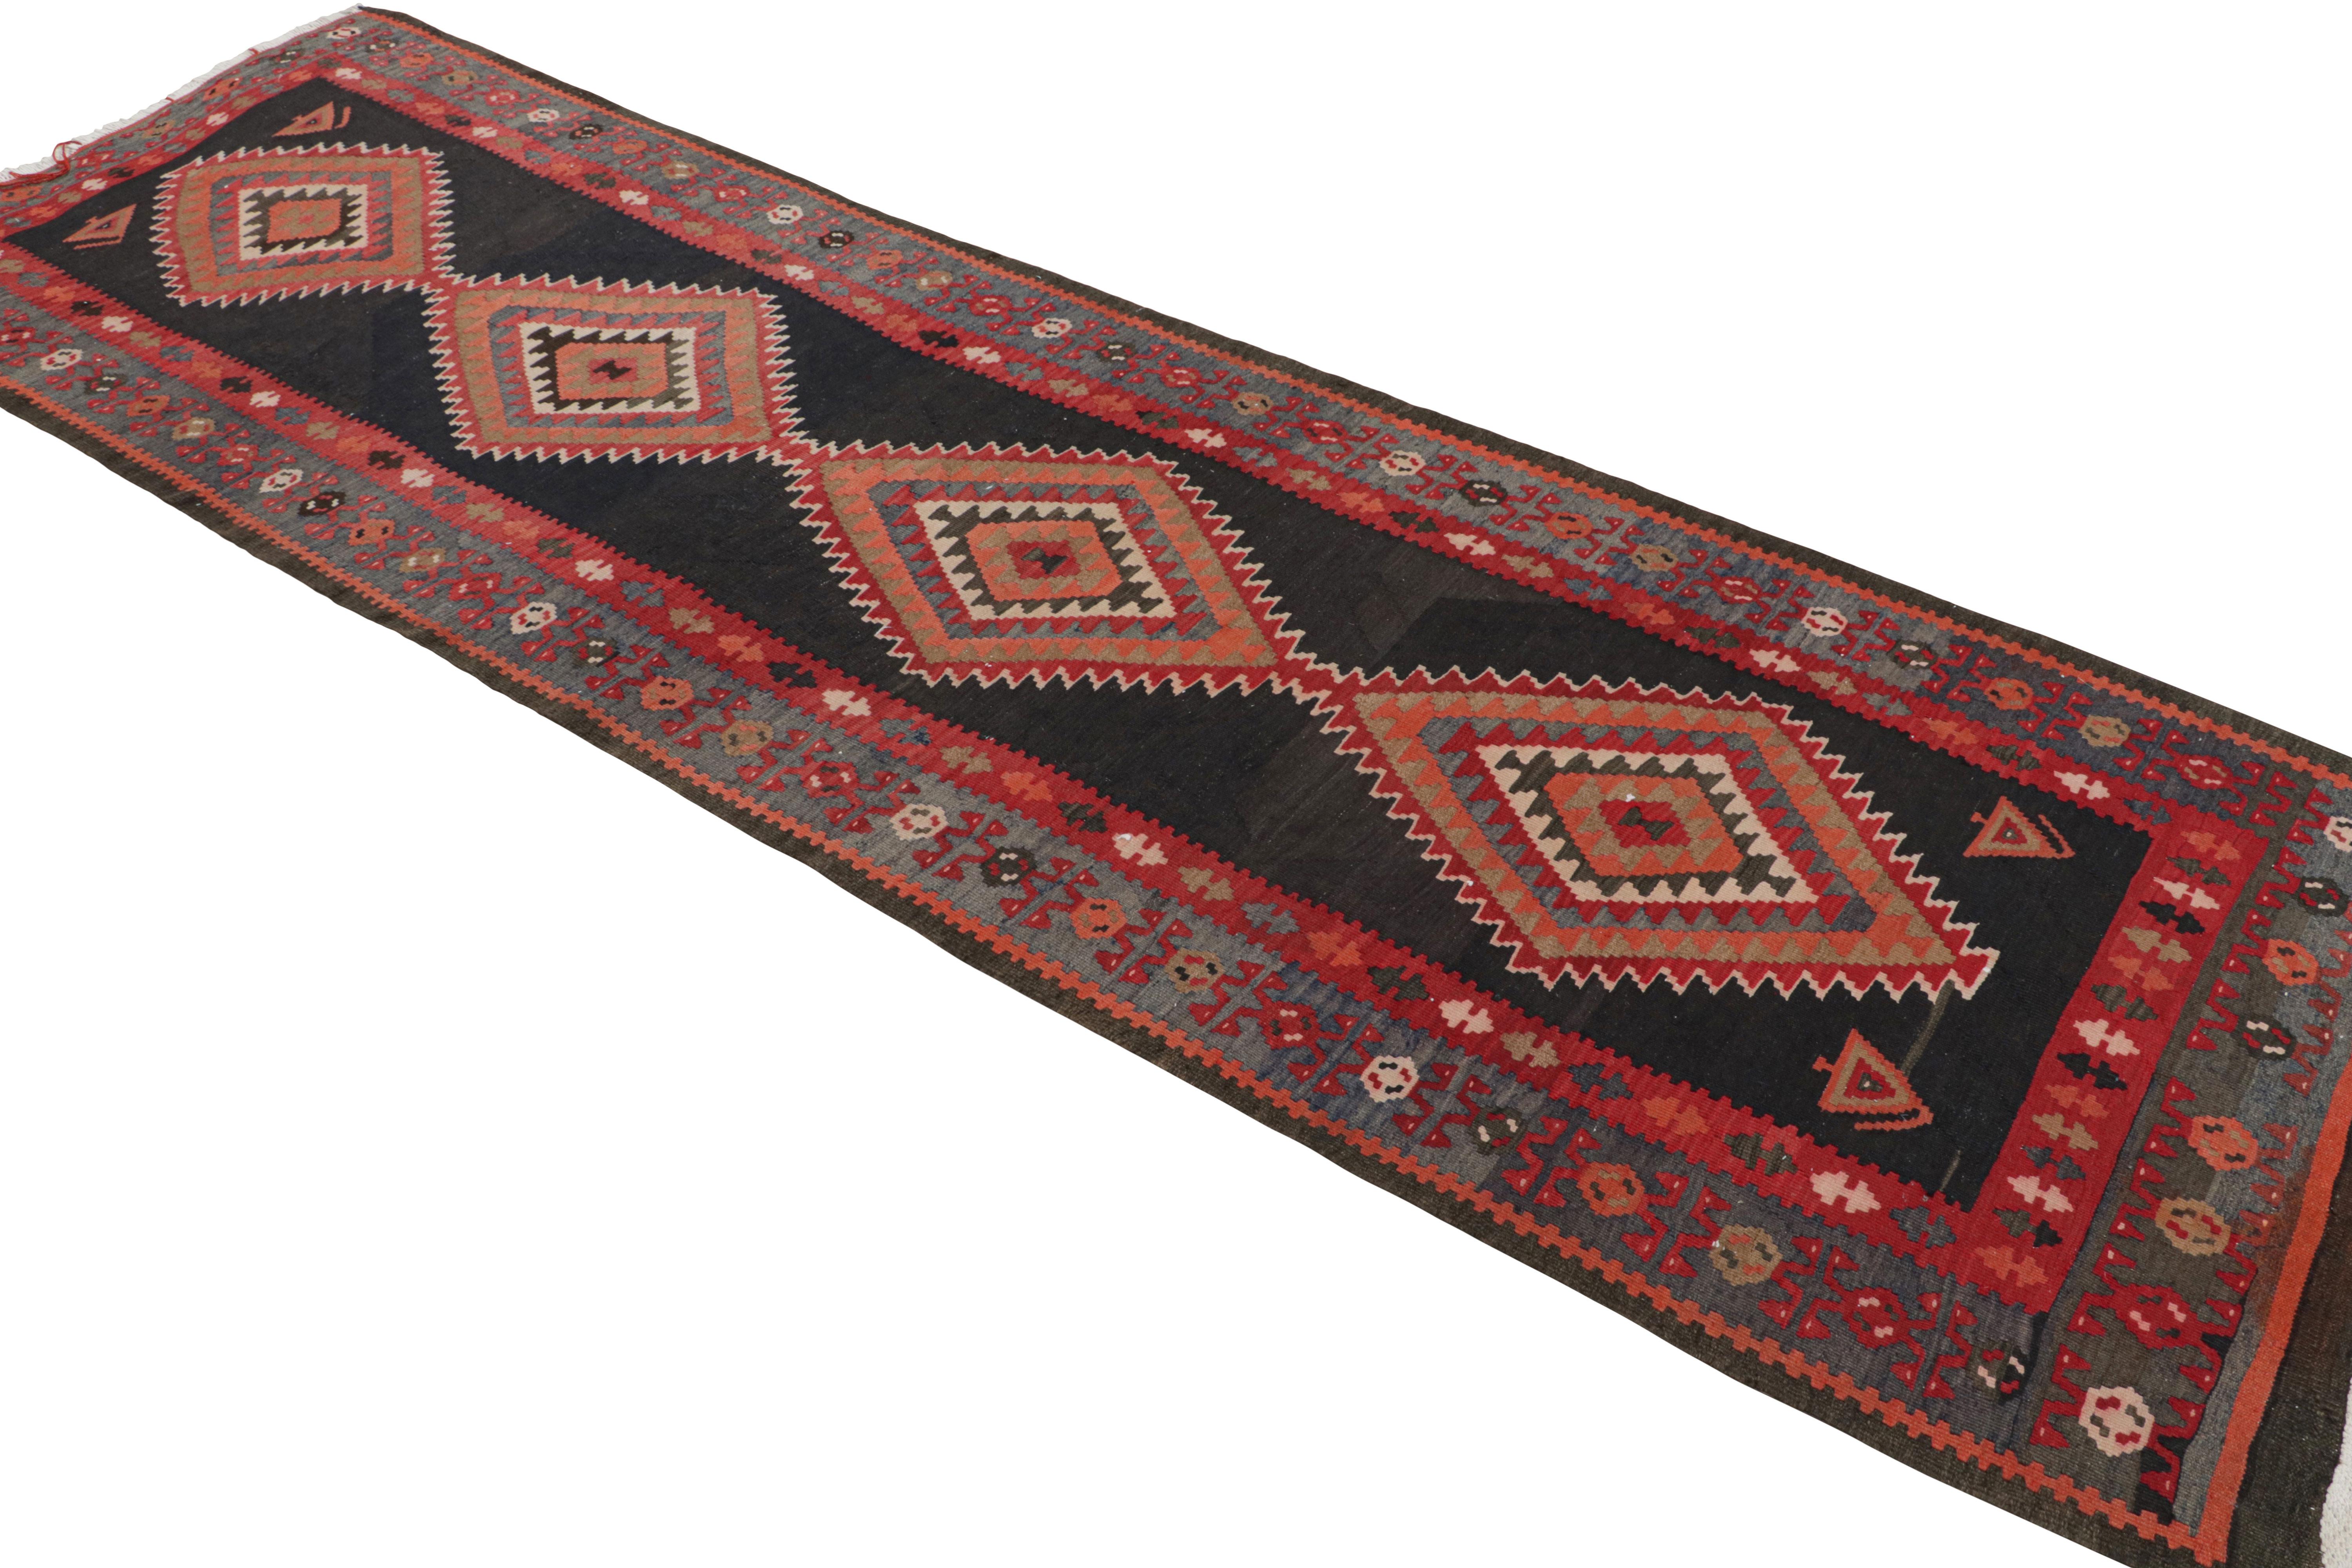 Handwoven in wool circa 1920-1930, this 4x12 antique Perisna Kilim connotes a Kermanshad rug design, exemplifying bold tribal aesthetics of its traditional style. This particular piece sports a rare black background to host a positive-negative